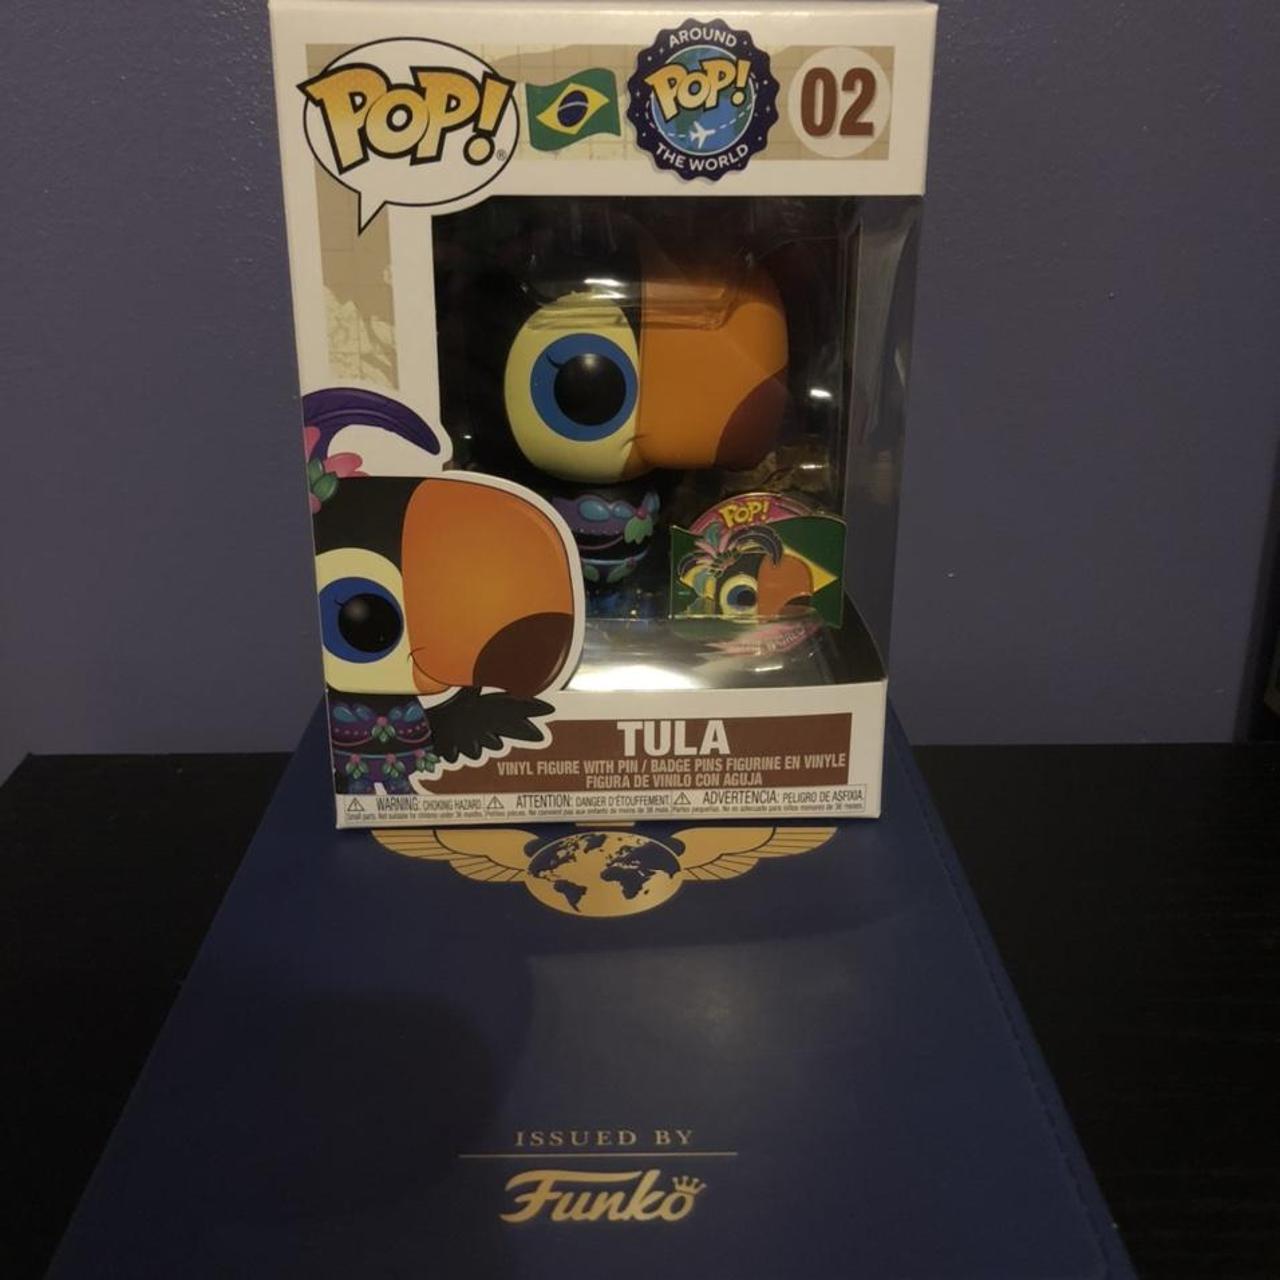 Funko: Passport, Around the World (Pin Collection Book) Exclusive 